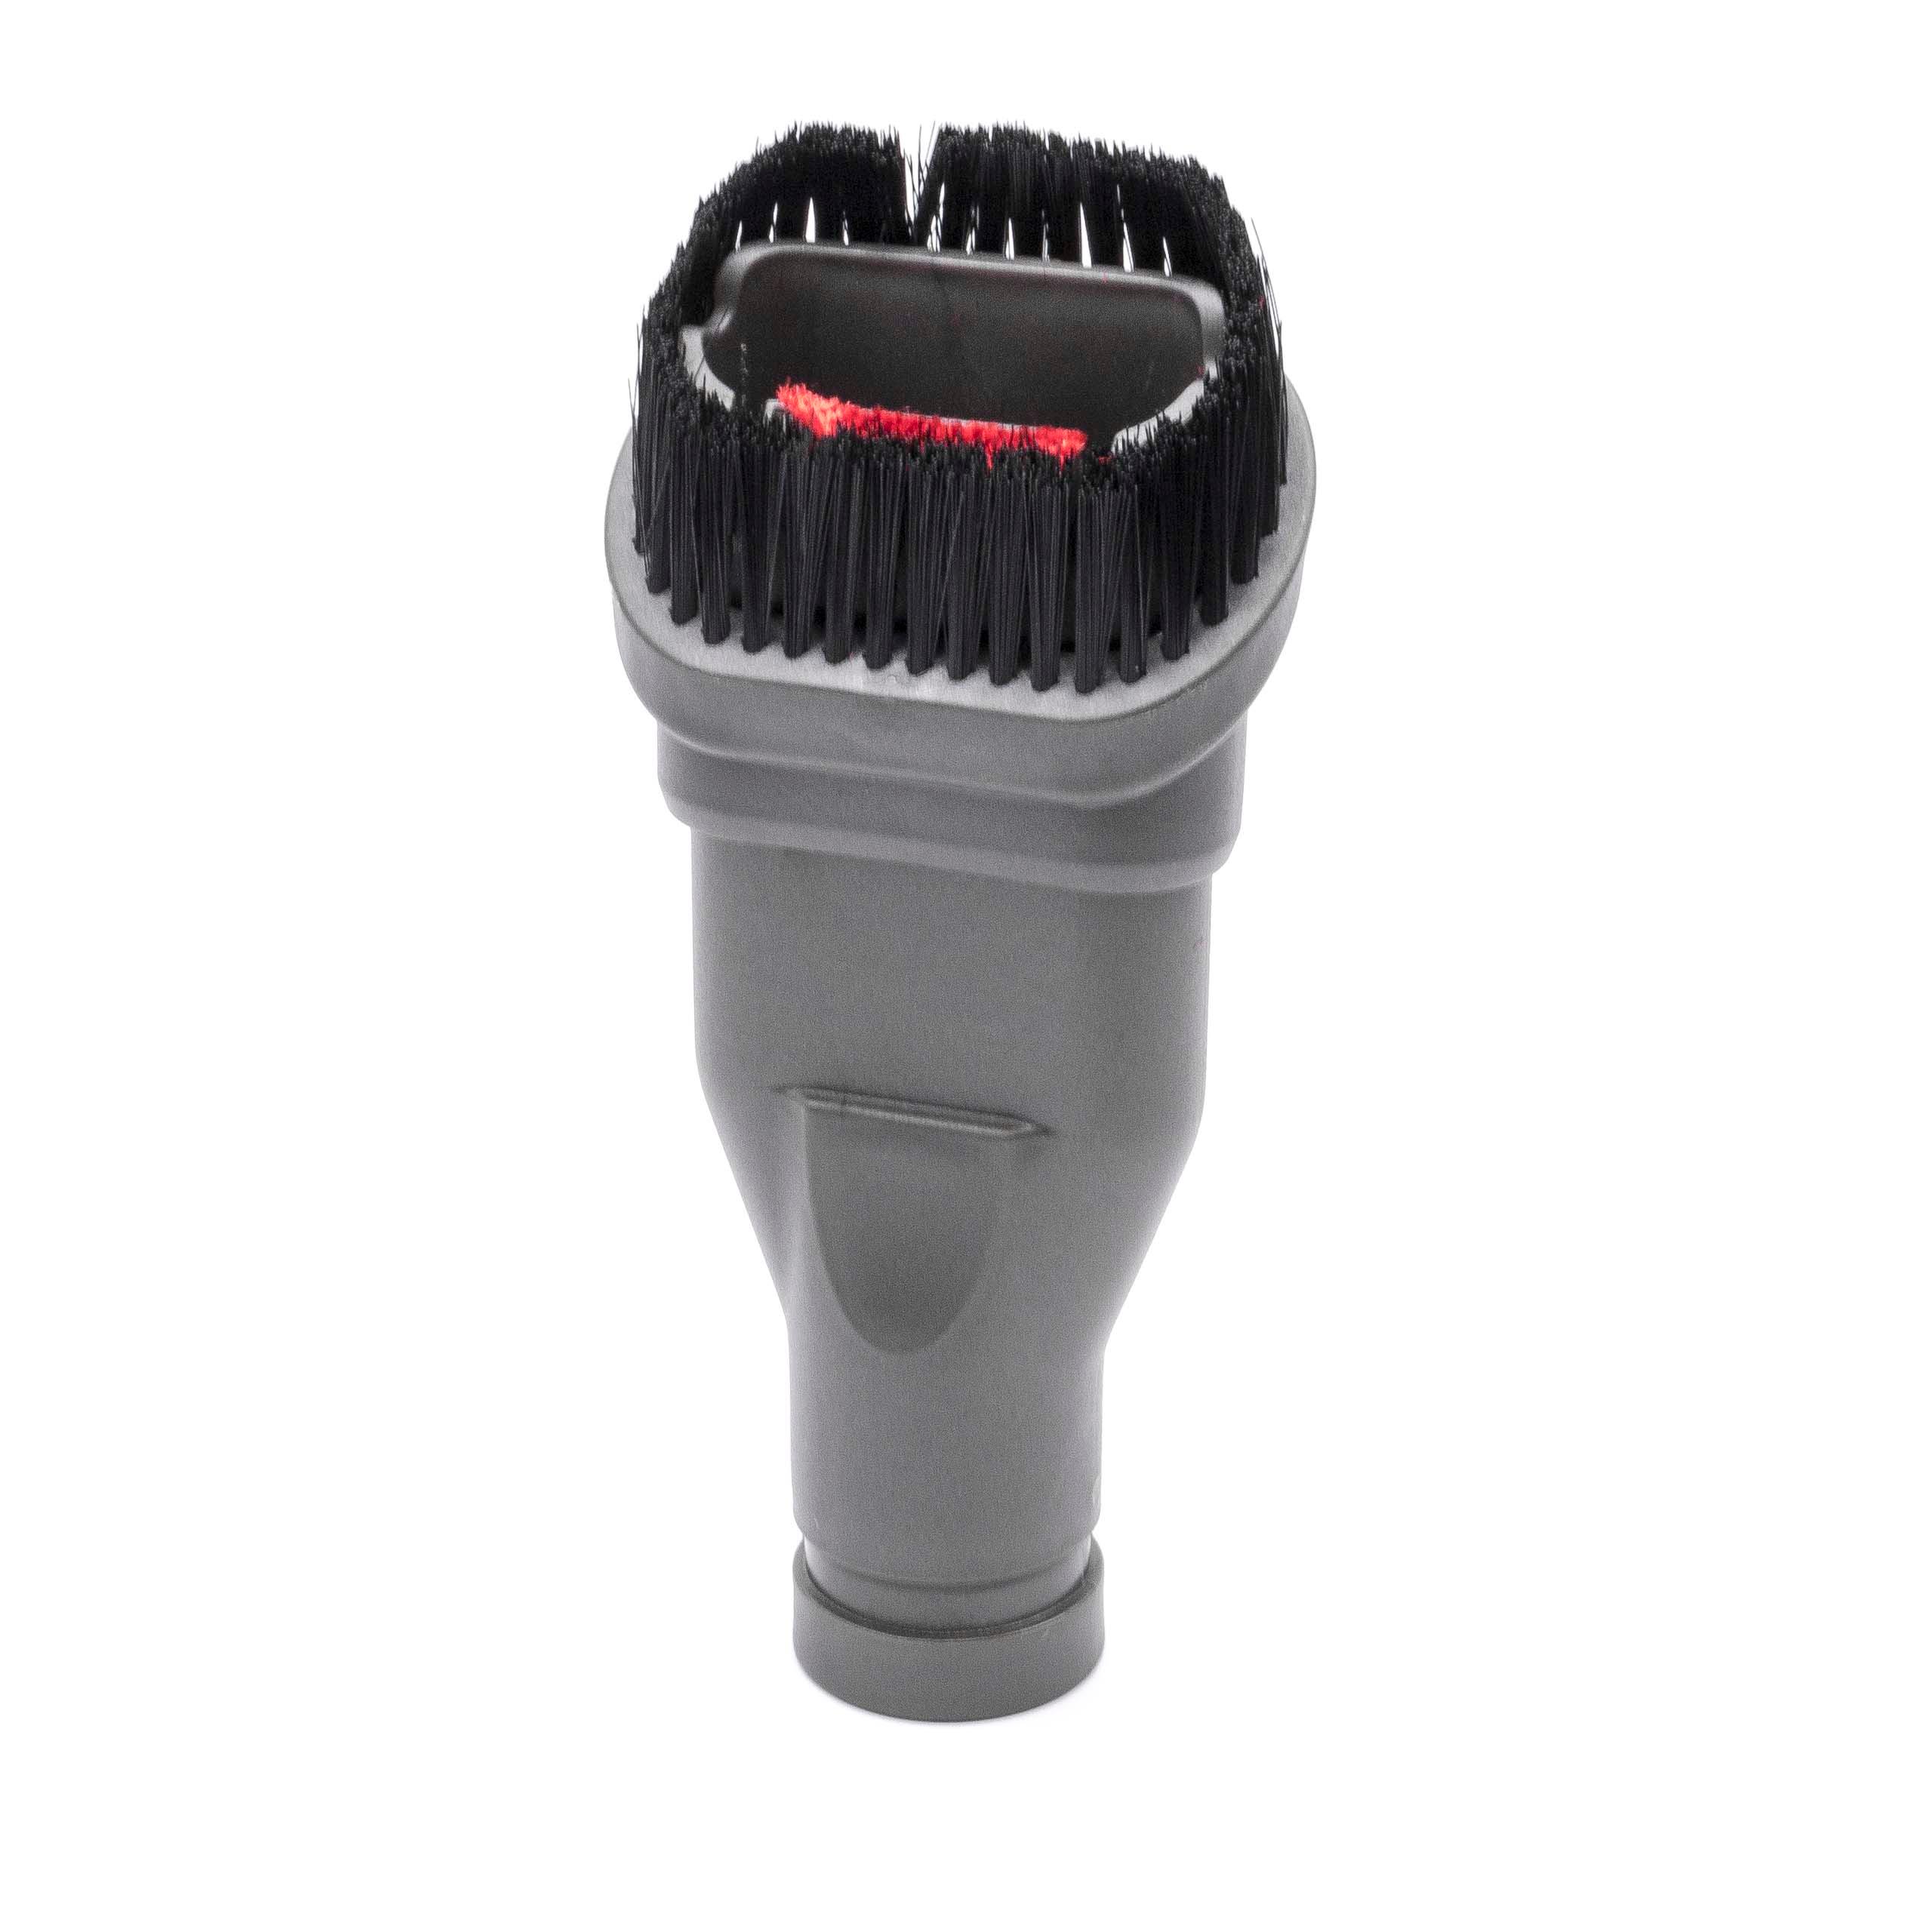  2-in-1 Combi / Crevice Tool for Dyson DC30 Vacuum Cleaner etc. - Furniture Brush with Bristles